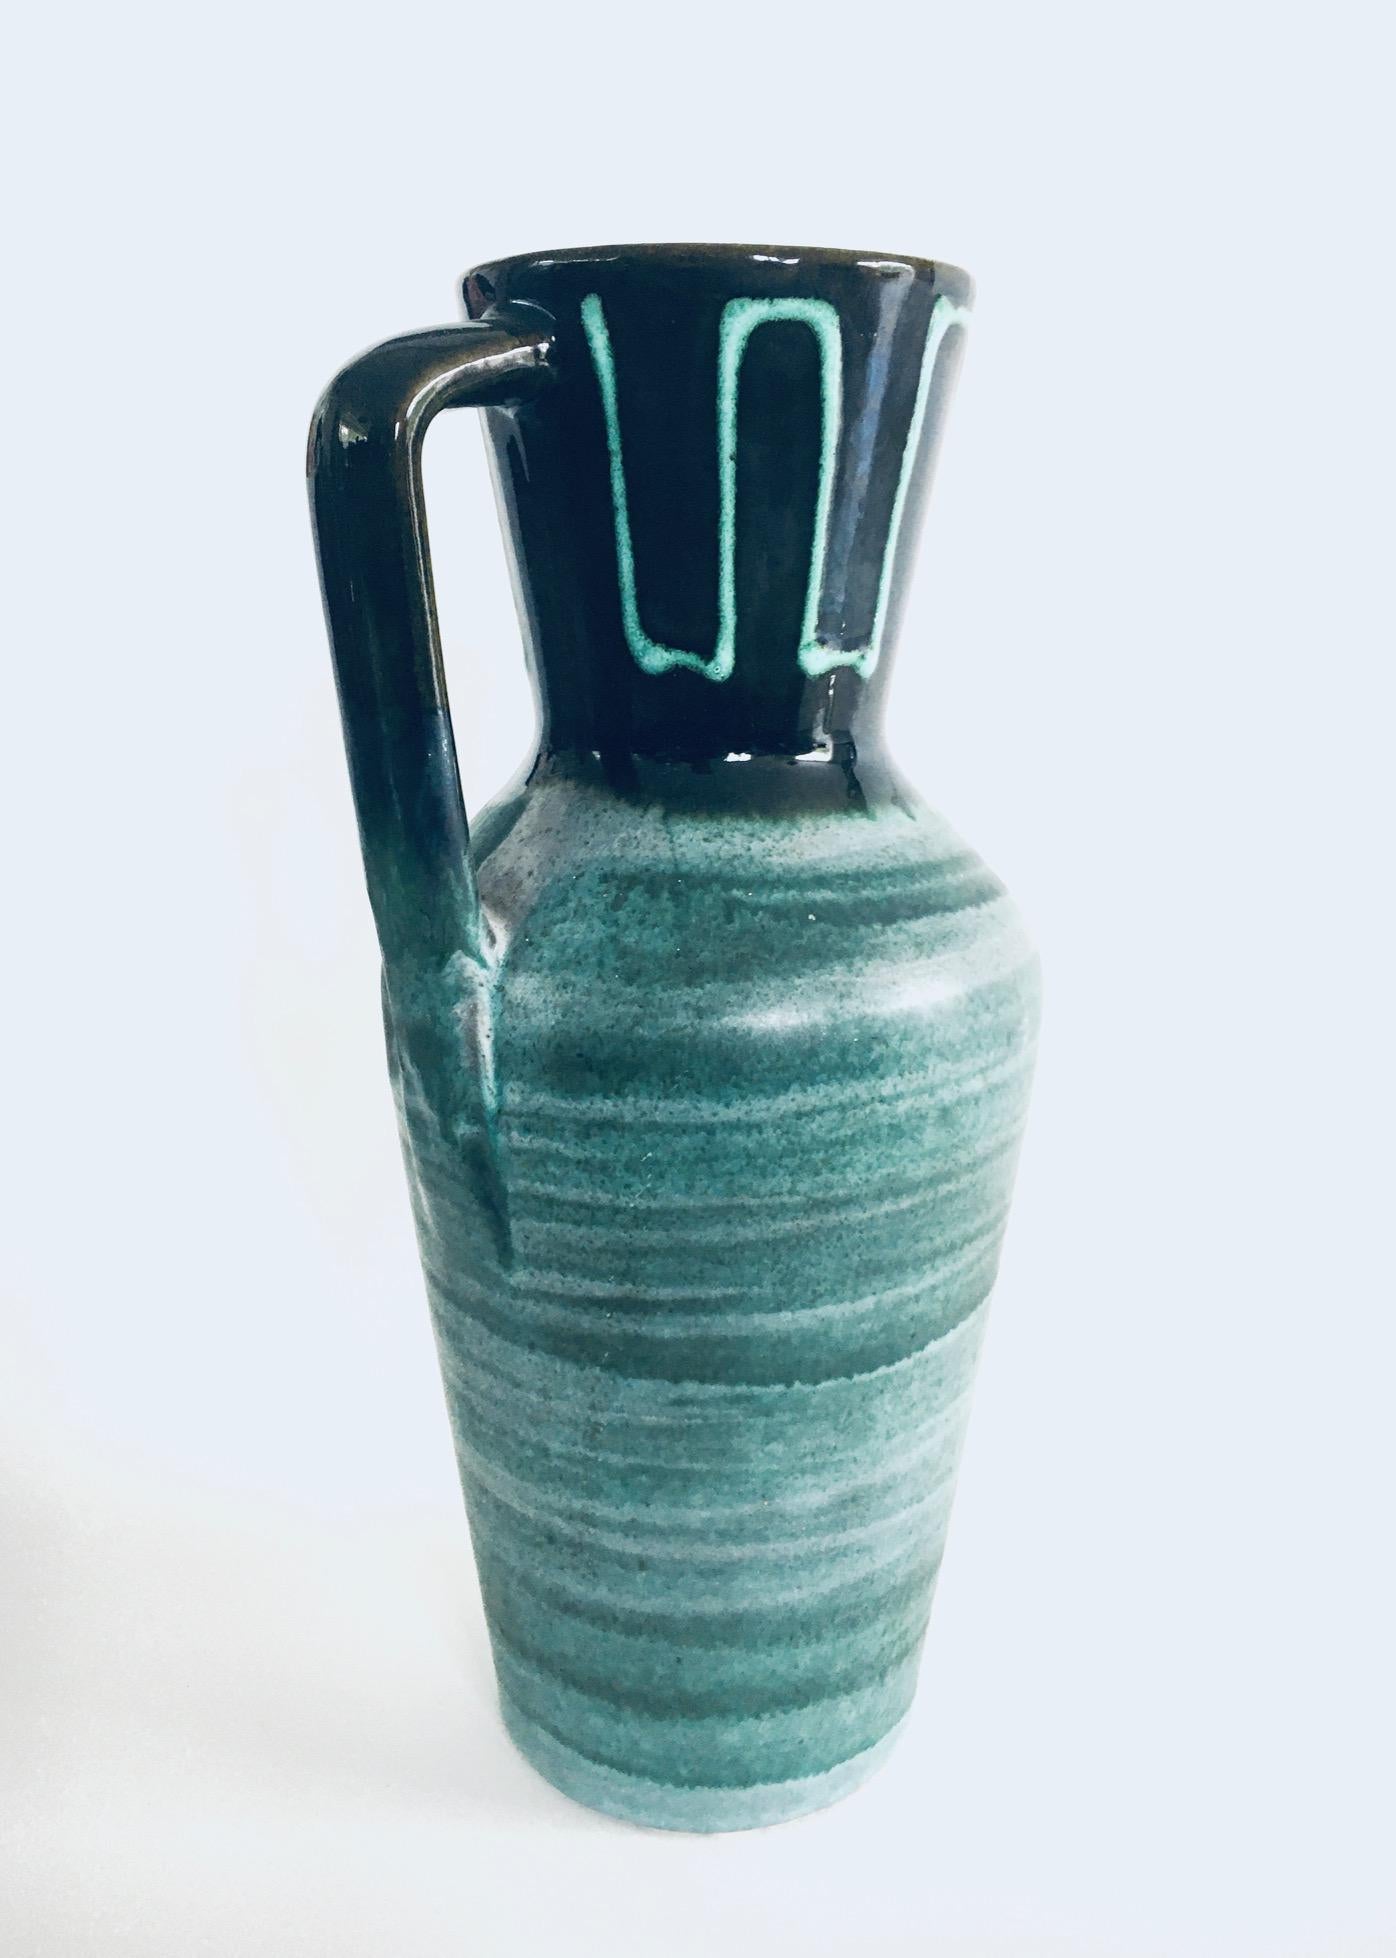 Midcentury Modern Studio Pottery Vase Set by Scheurich, West Germany 1960's For Sale 5